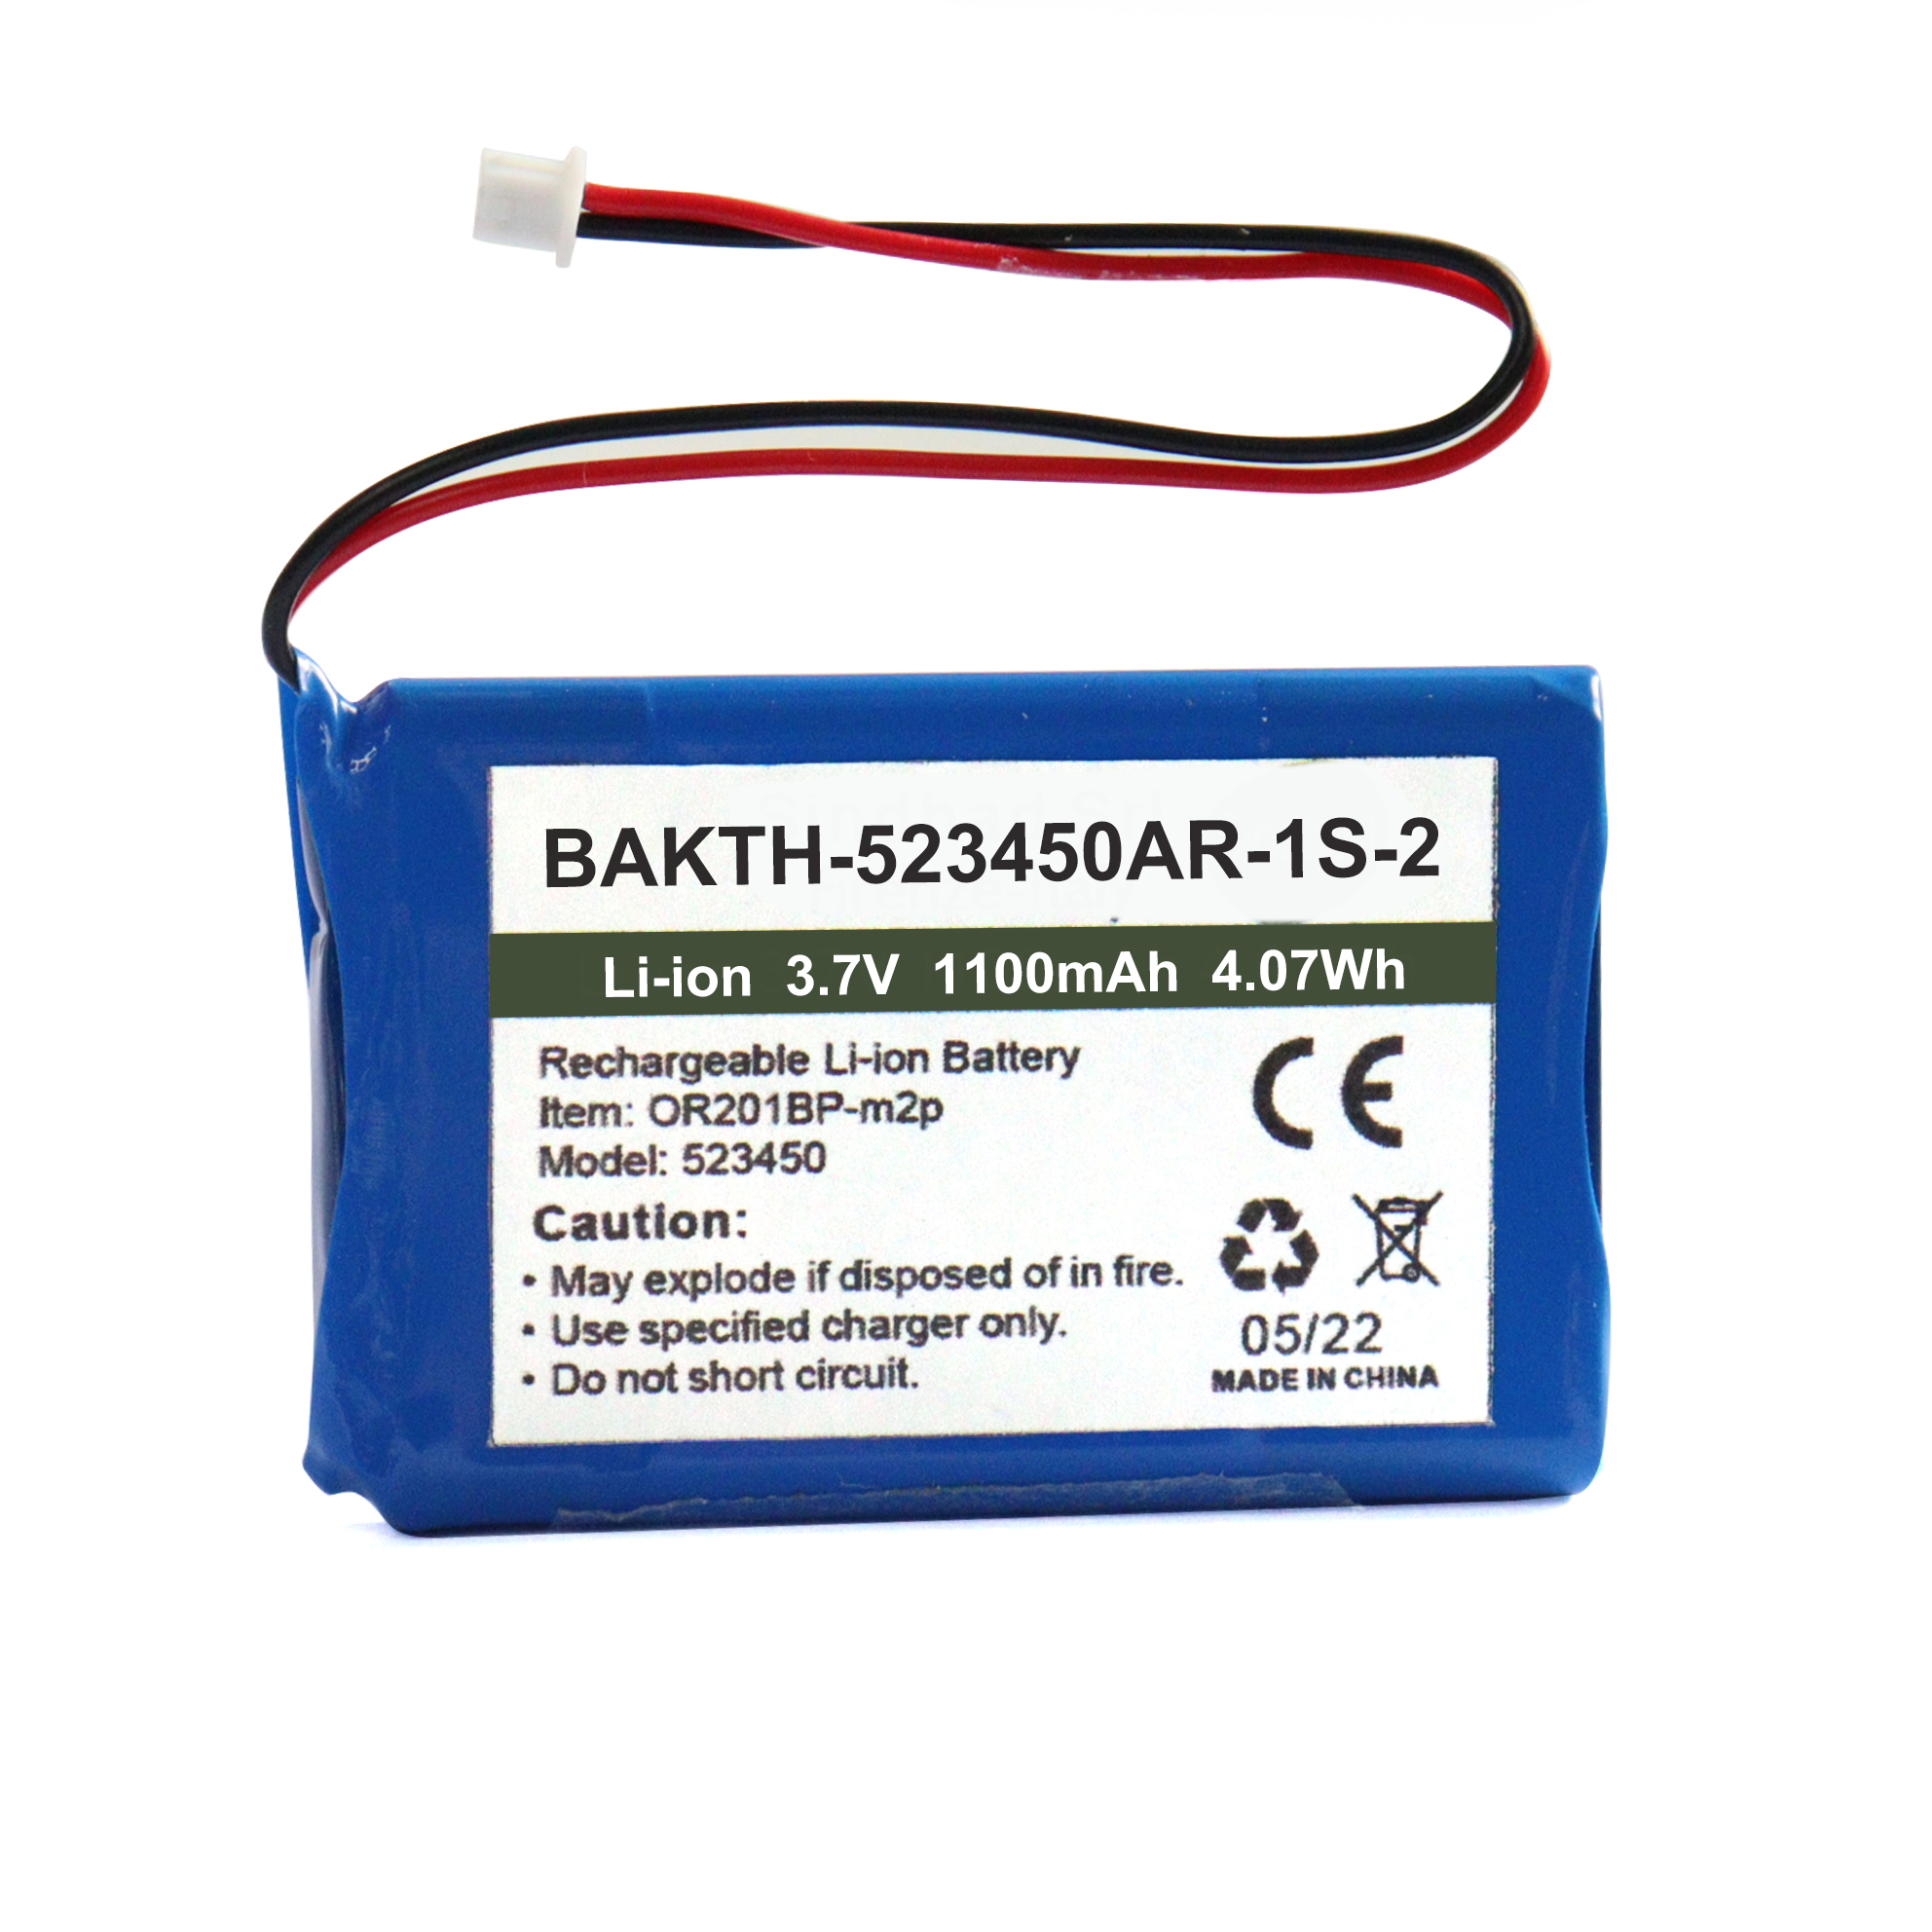 BAKTH-523450AR-1S-2 3.7V 1800mAh Lithium ion Battery Pack Rechargeable Battery Pack for Wearable Appliance